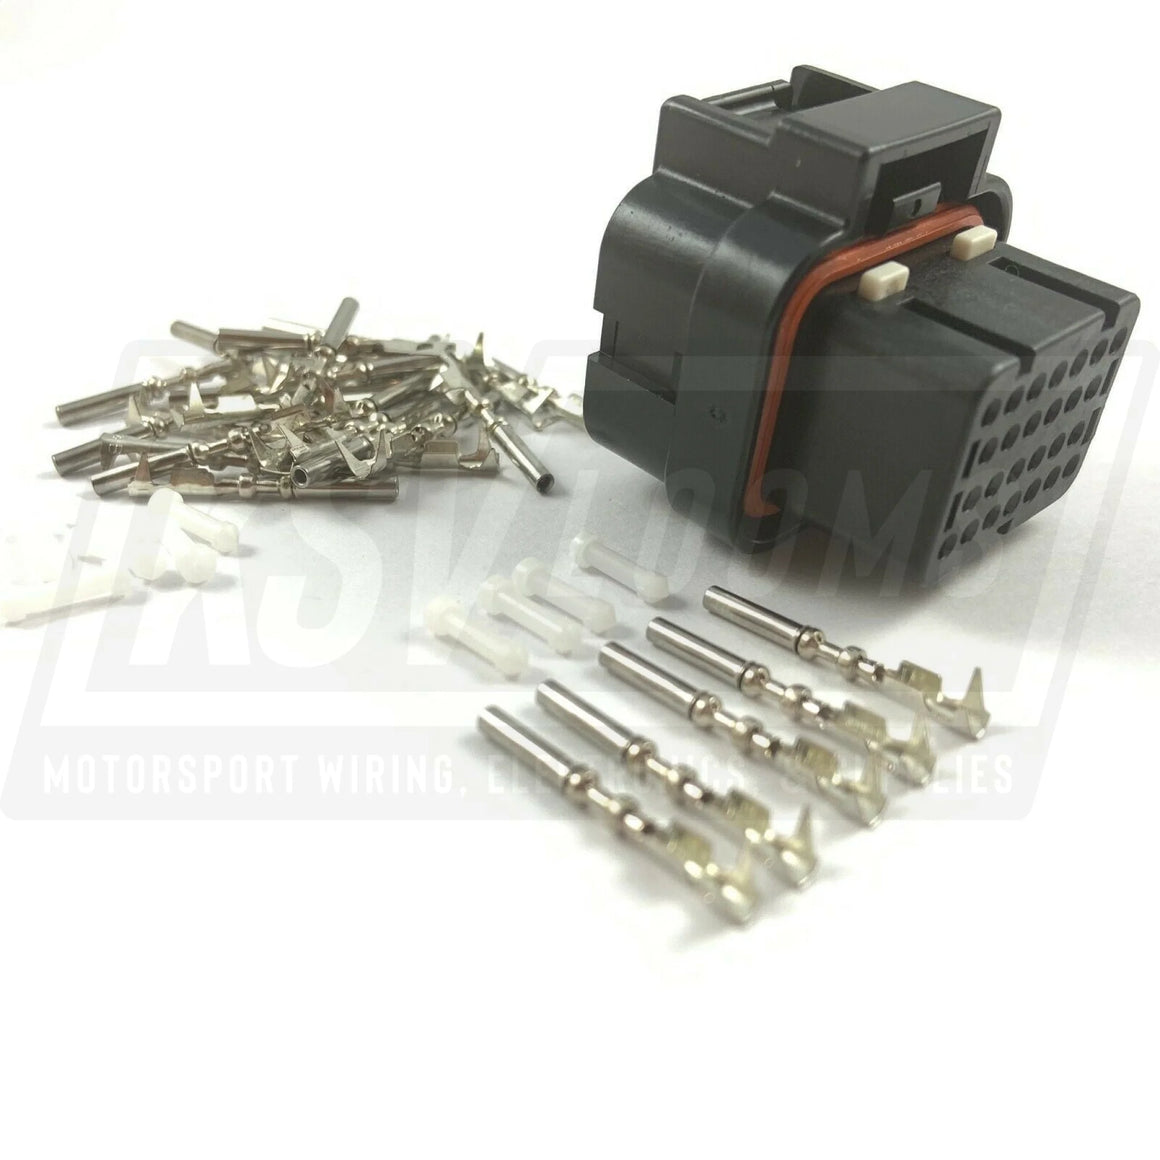 26-Way Connector Kit For Motec M142 Ecu D (24-20 Awg)